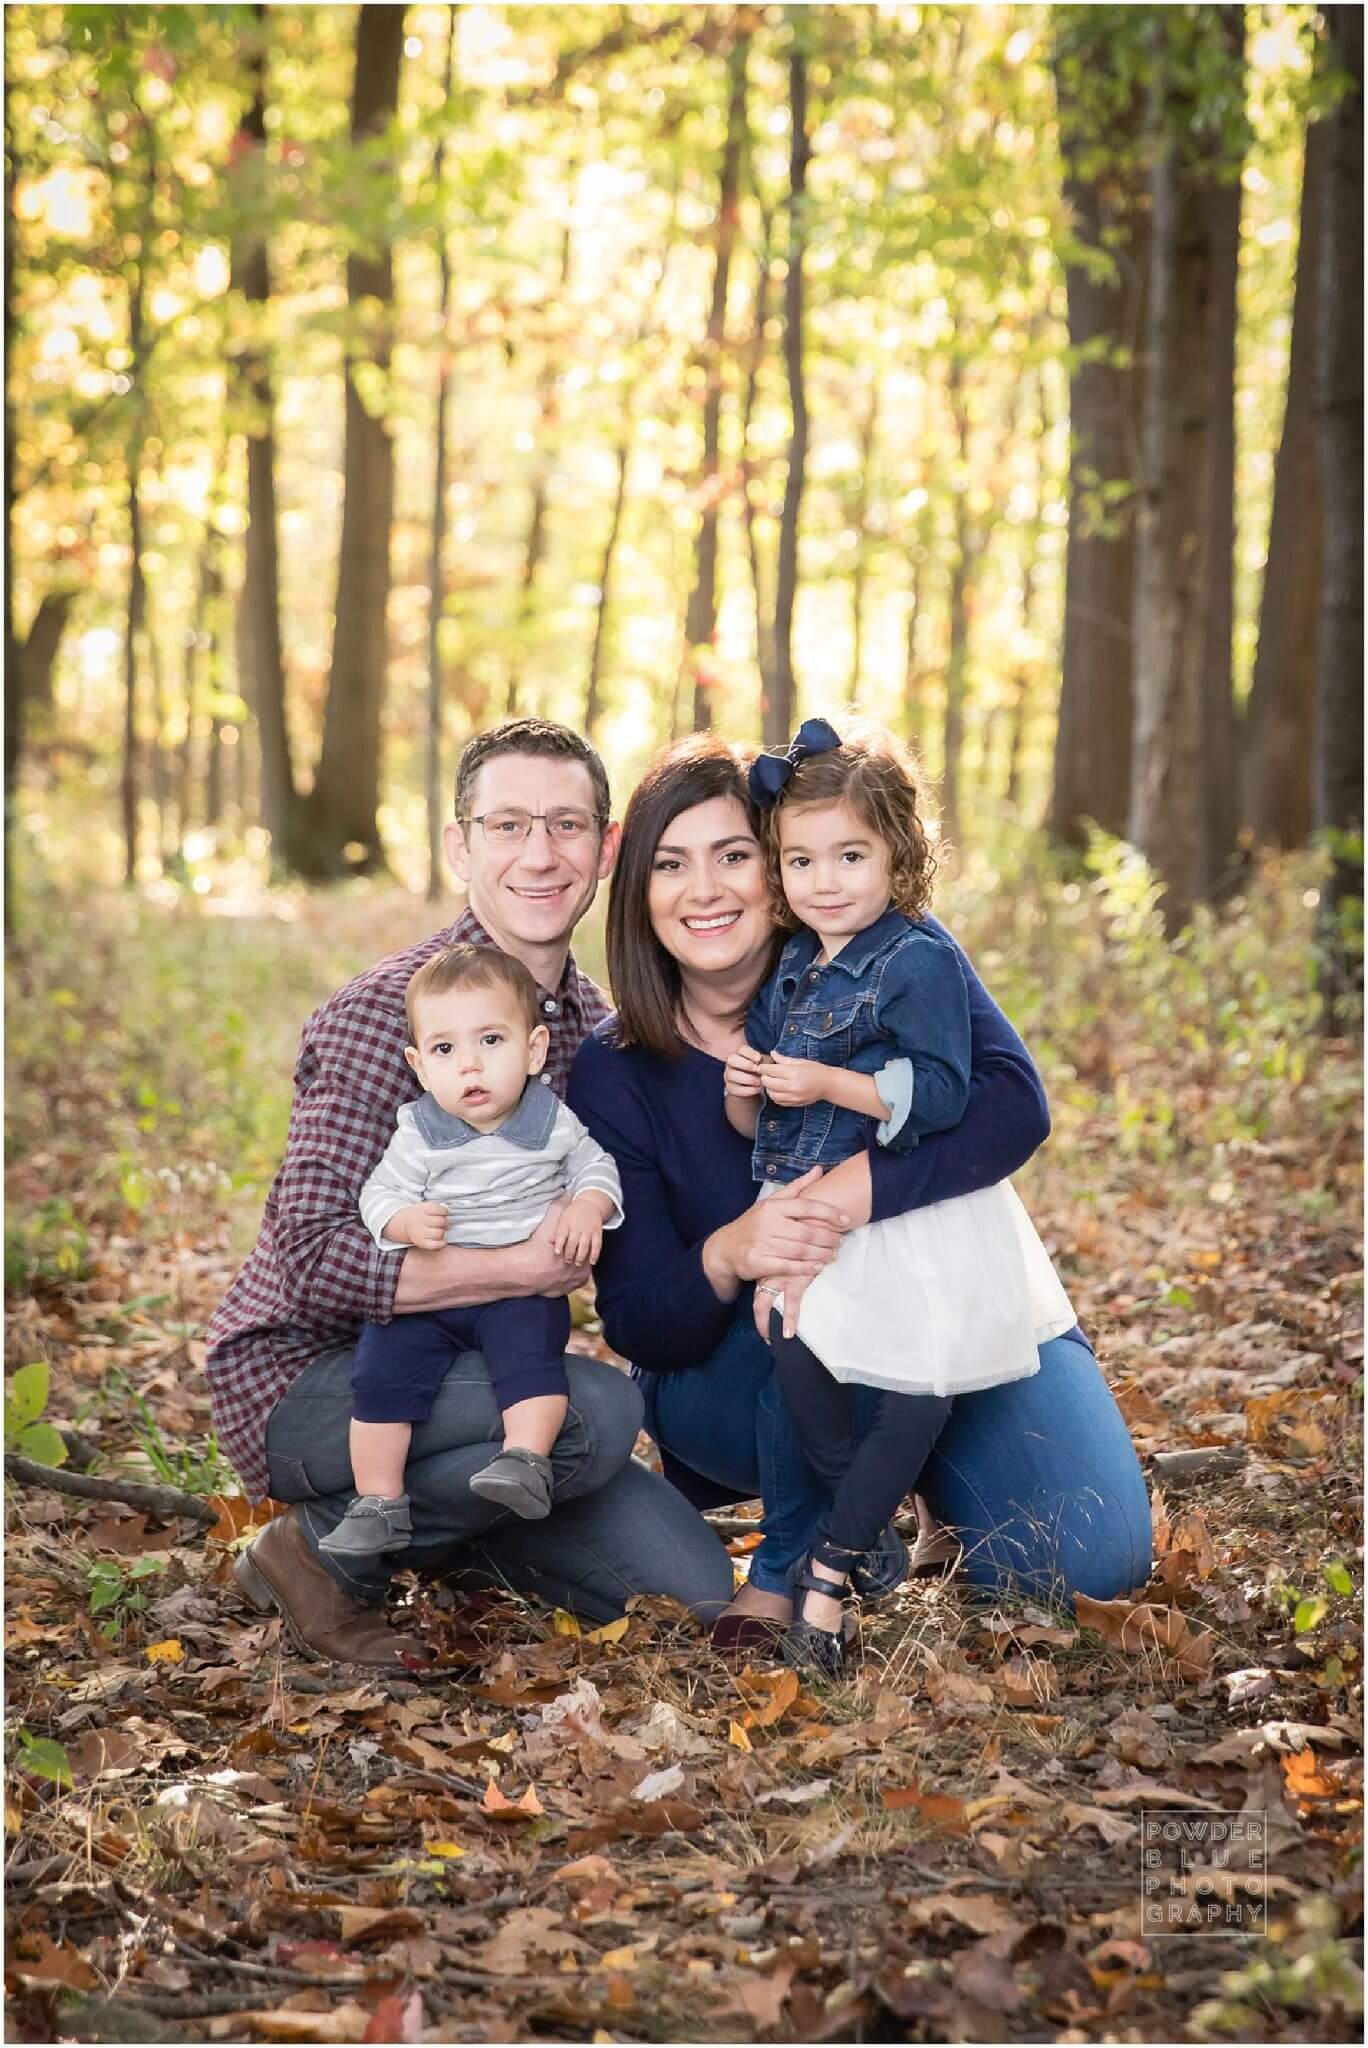 You are currently viewing October 2016 Mini Sessions at Powder Blue Photography | Pittsburgh Family Photographer